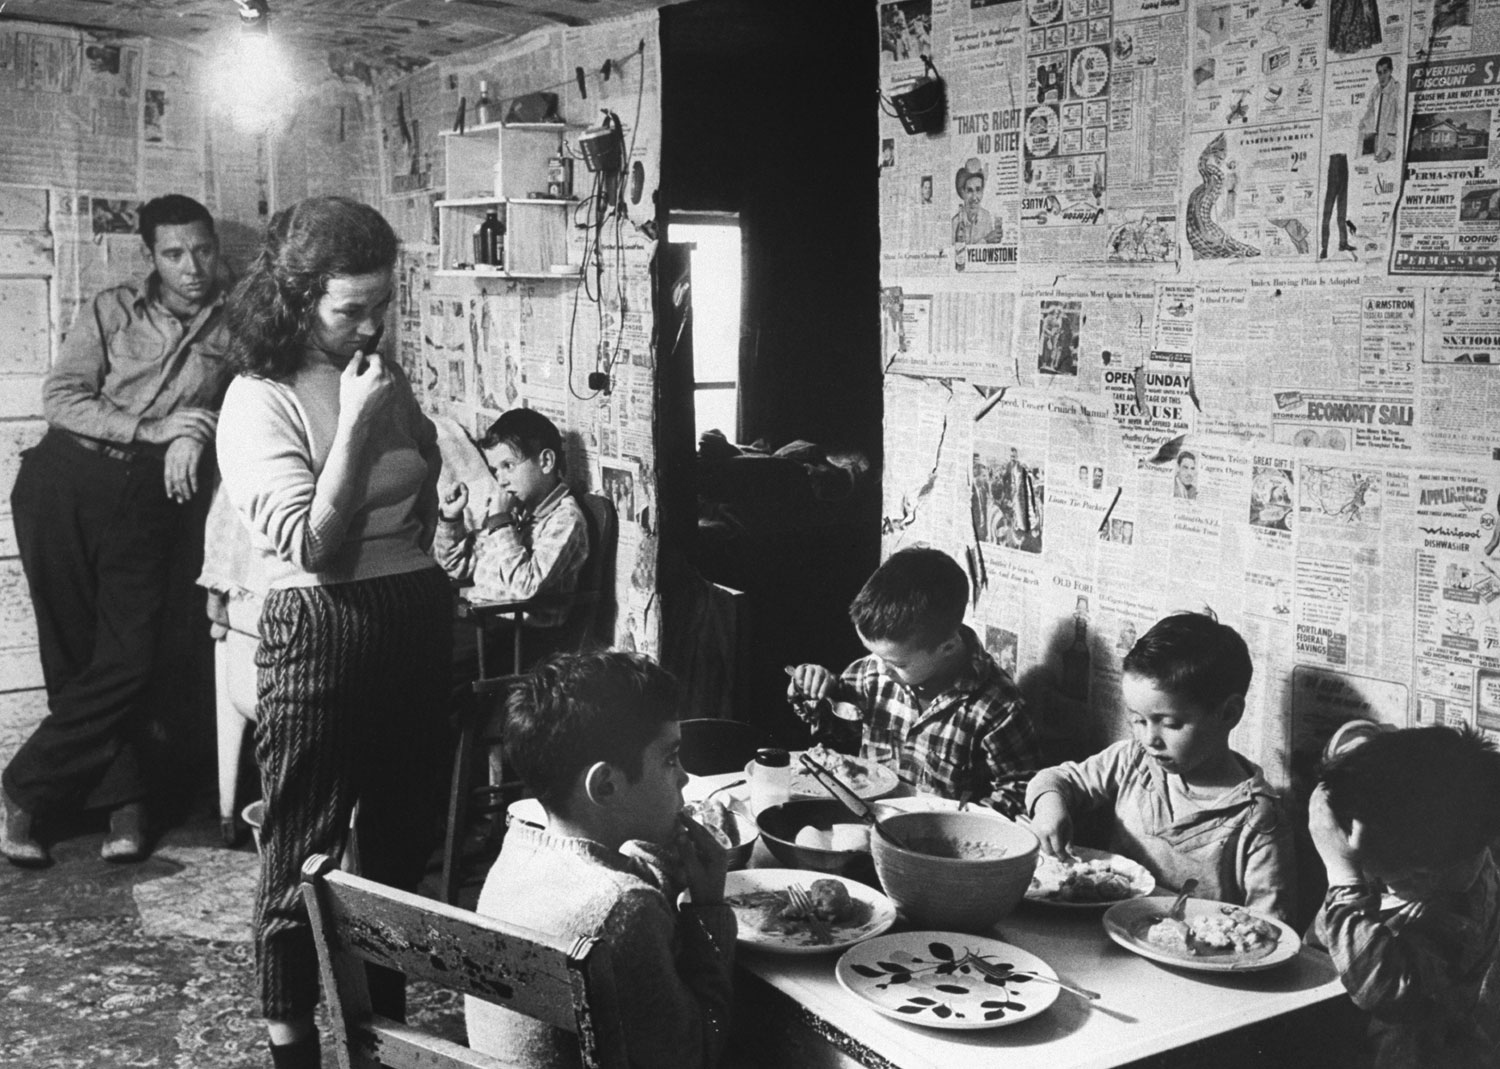 Youngsters lap up a surplus-commodity supper of pan-fried biscuits, gravy and potatoes at the Odell Smiths of Friday Branch Creek. The newspapers were pasted by Mrs. Smith in an effort to keep the place neat.